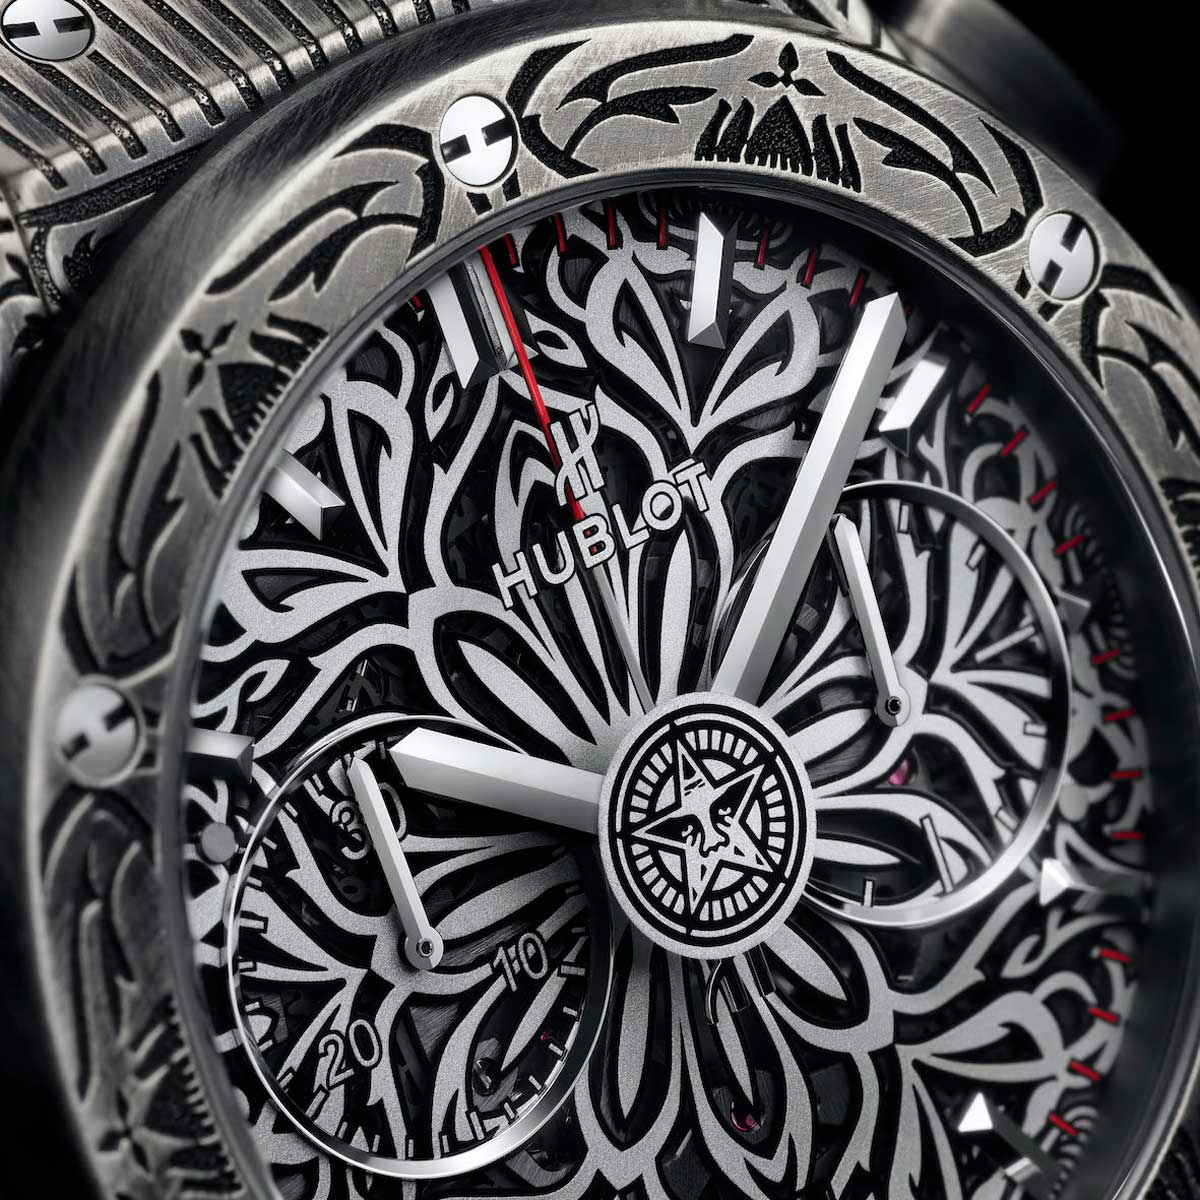 The engraving on the case, bezel, and dial is inspired by the mandala motif. Given all its details, the watch's symmetry is remarkable.